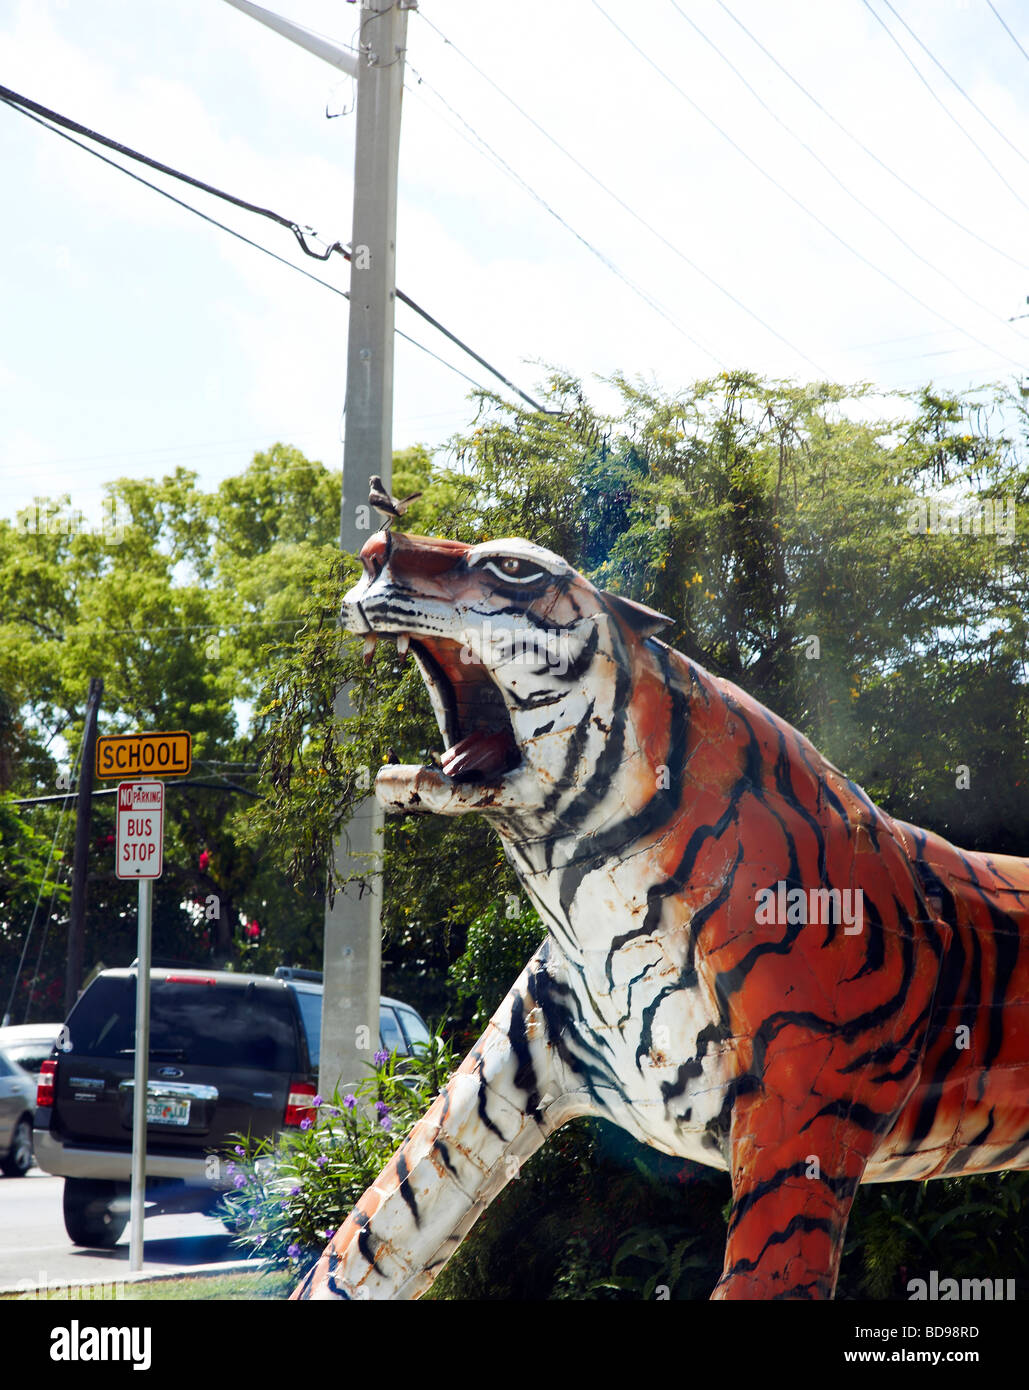 Sculpture of a roaring tiger with a bird sat on its nose Stock Photo